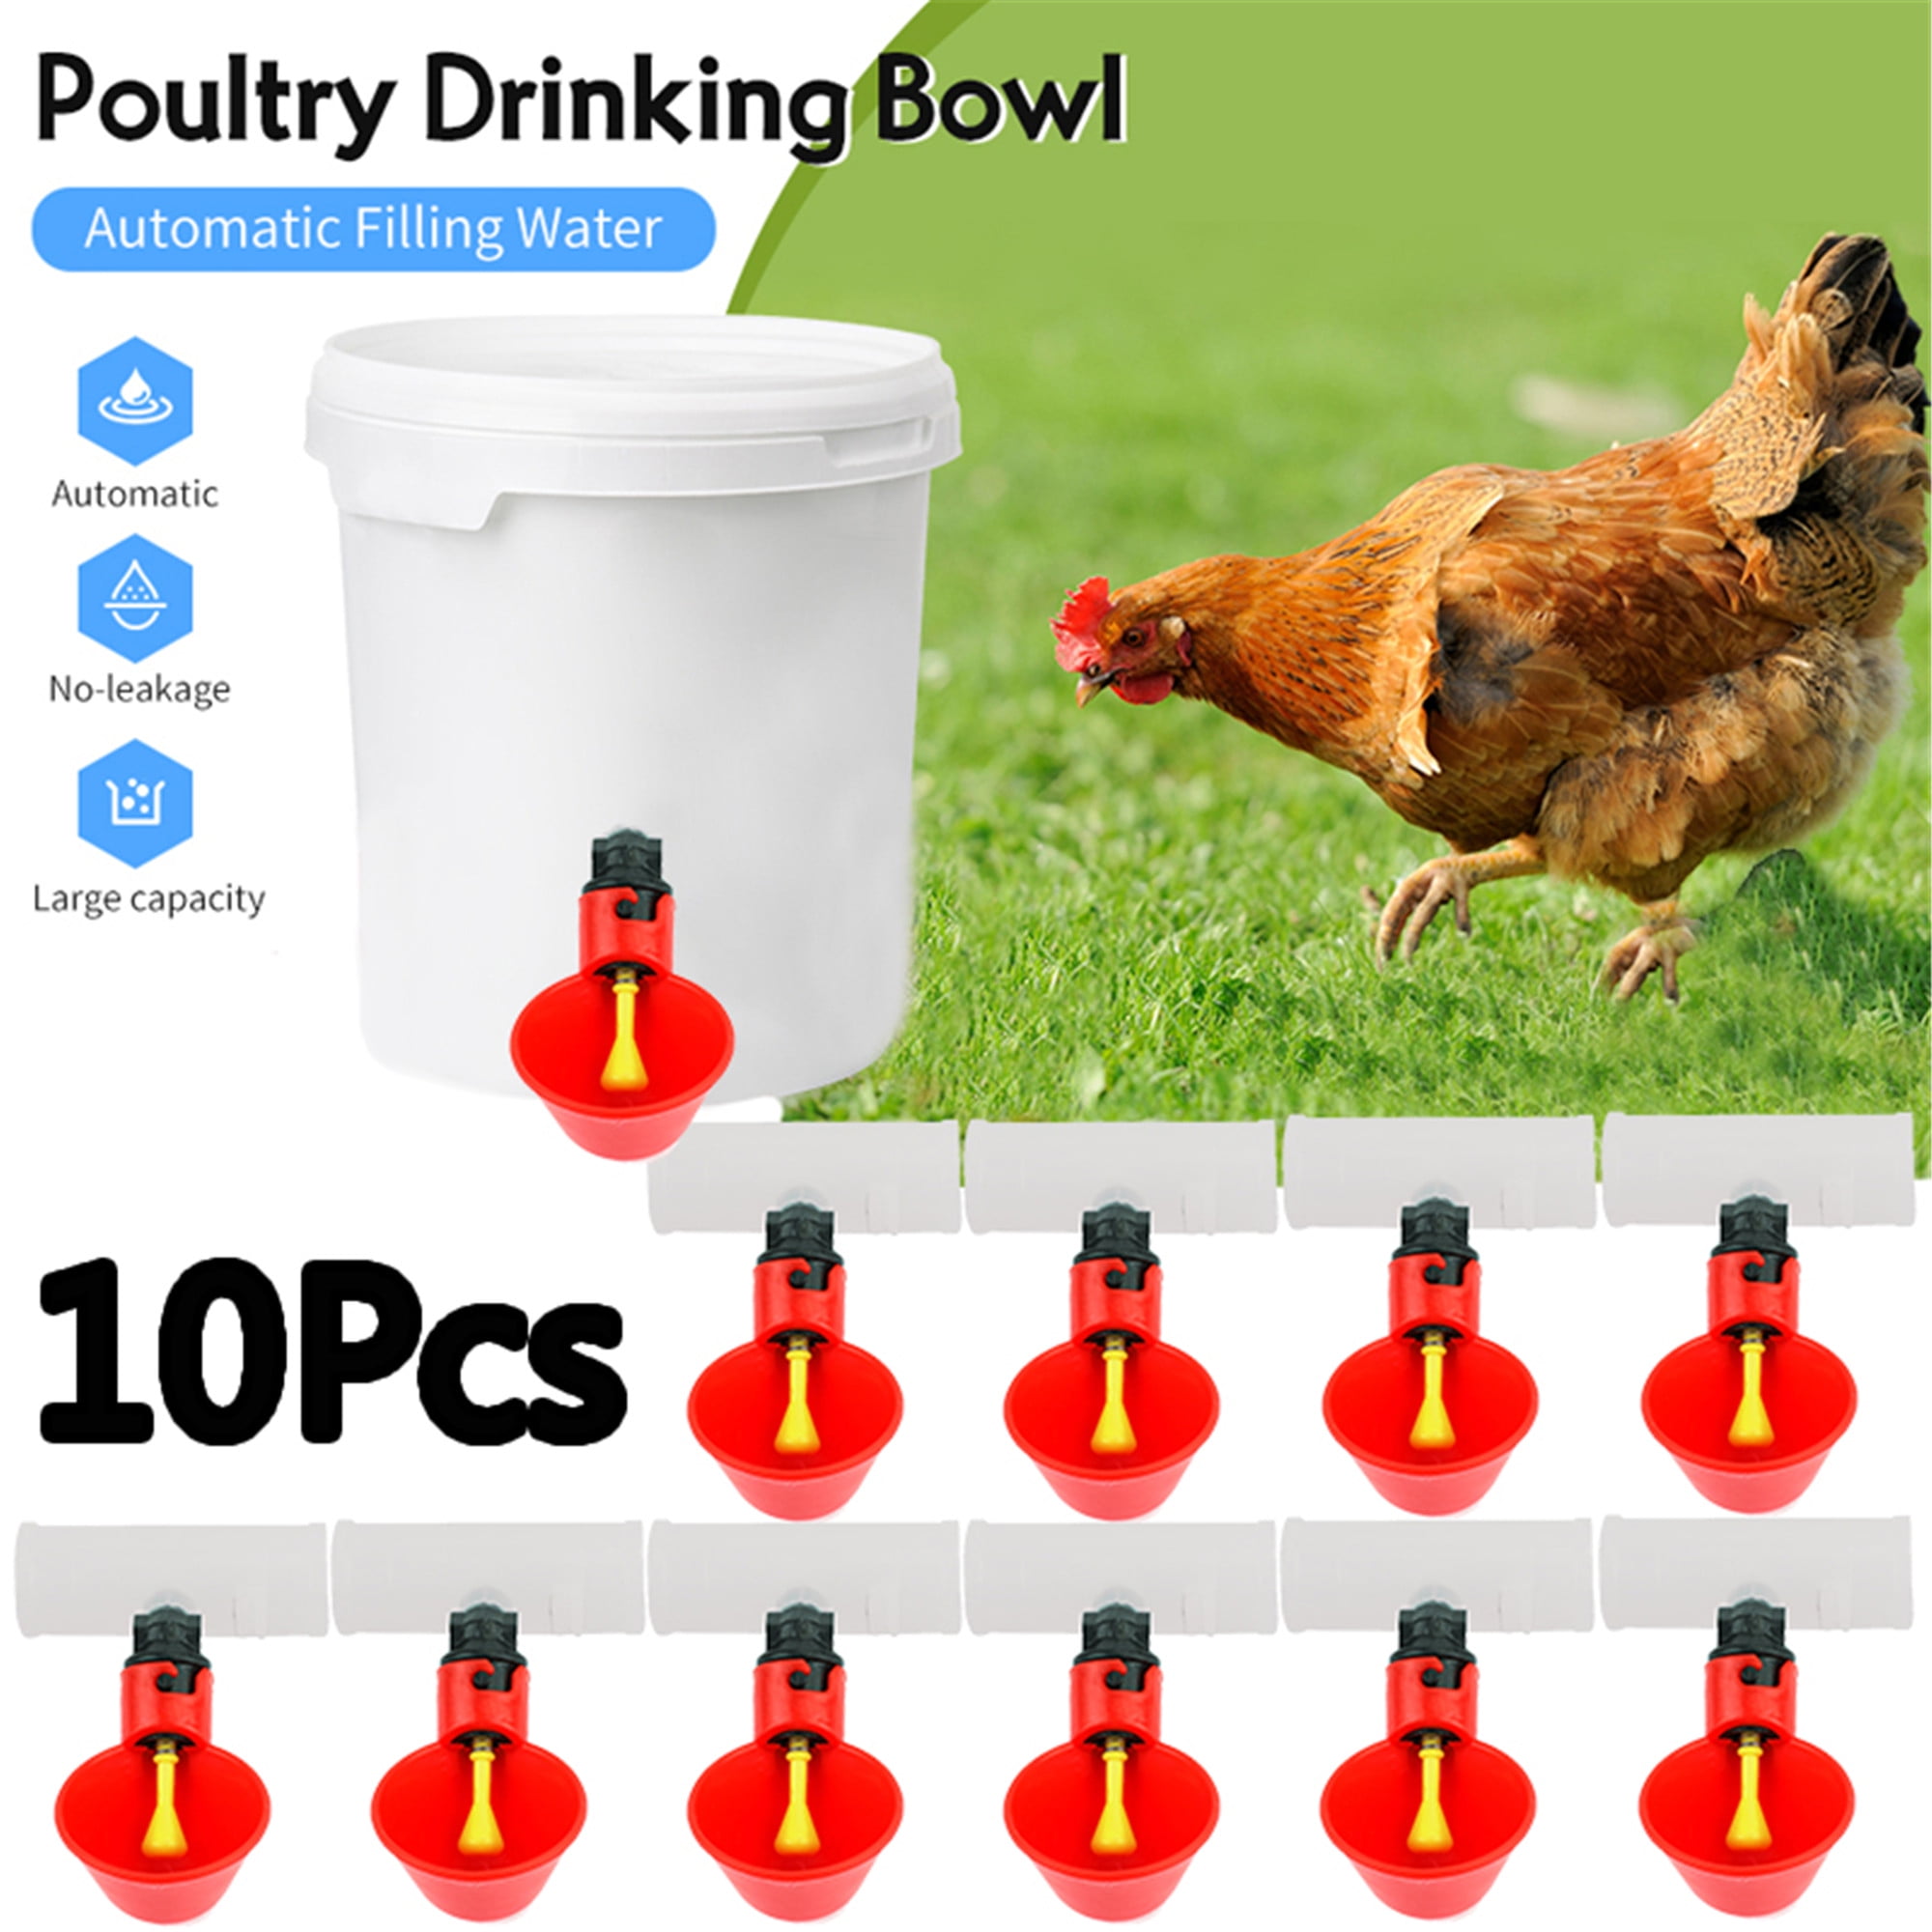 POULTRY DRINKER Waterers for Chickens Hens Chicks Turkey Quail Poultry Birds 4 